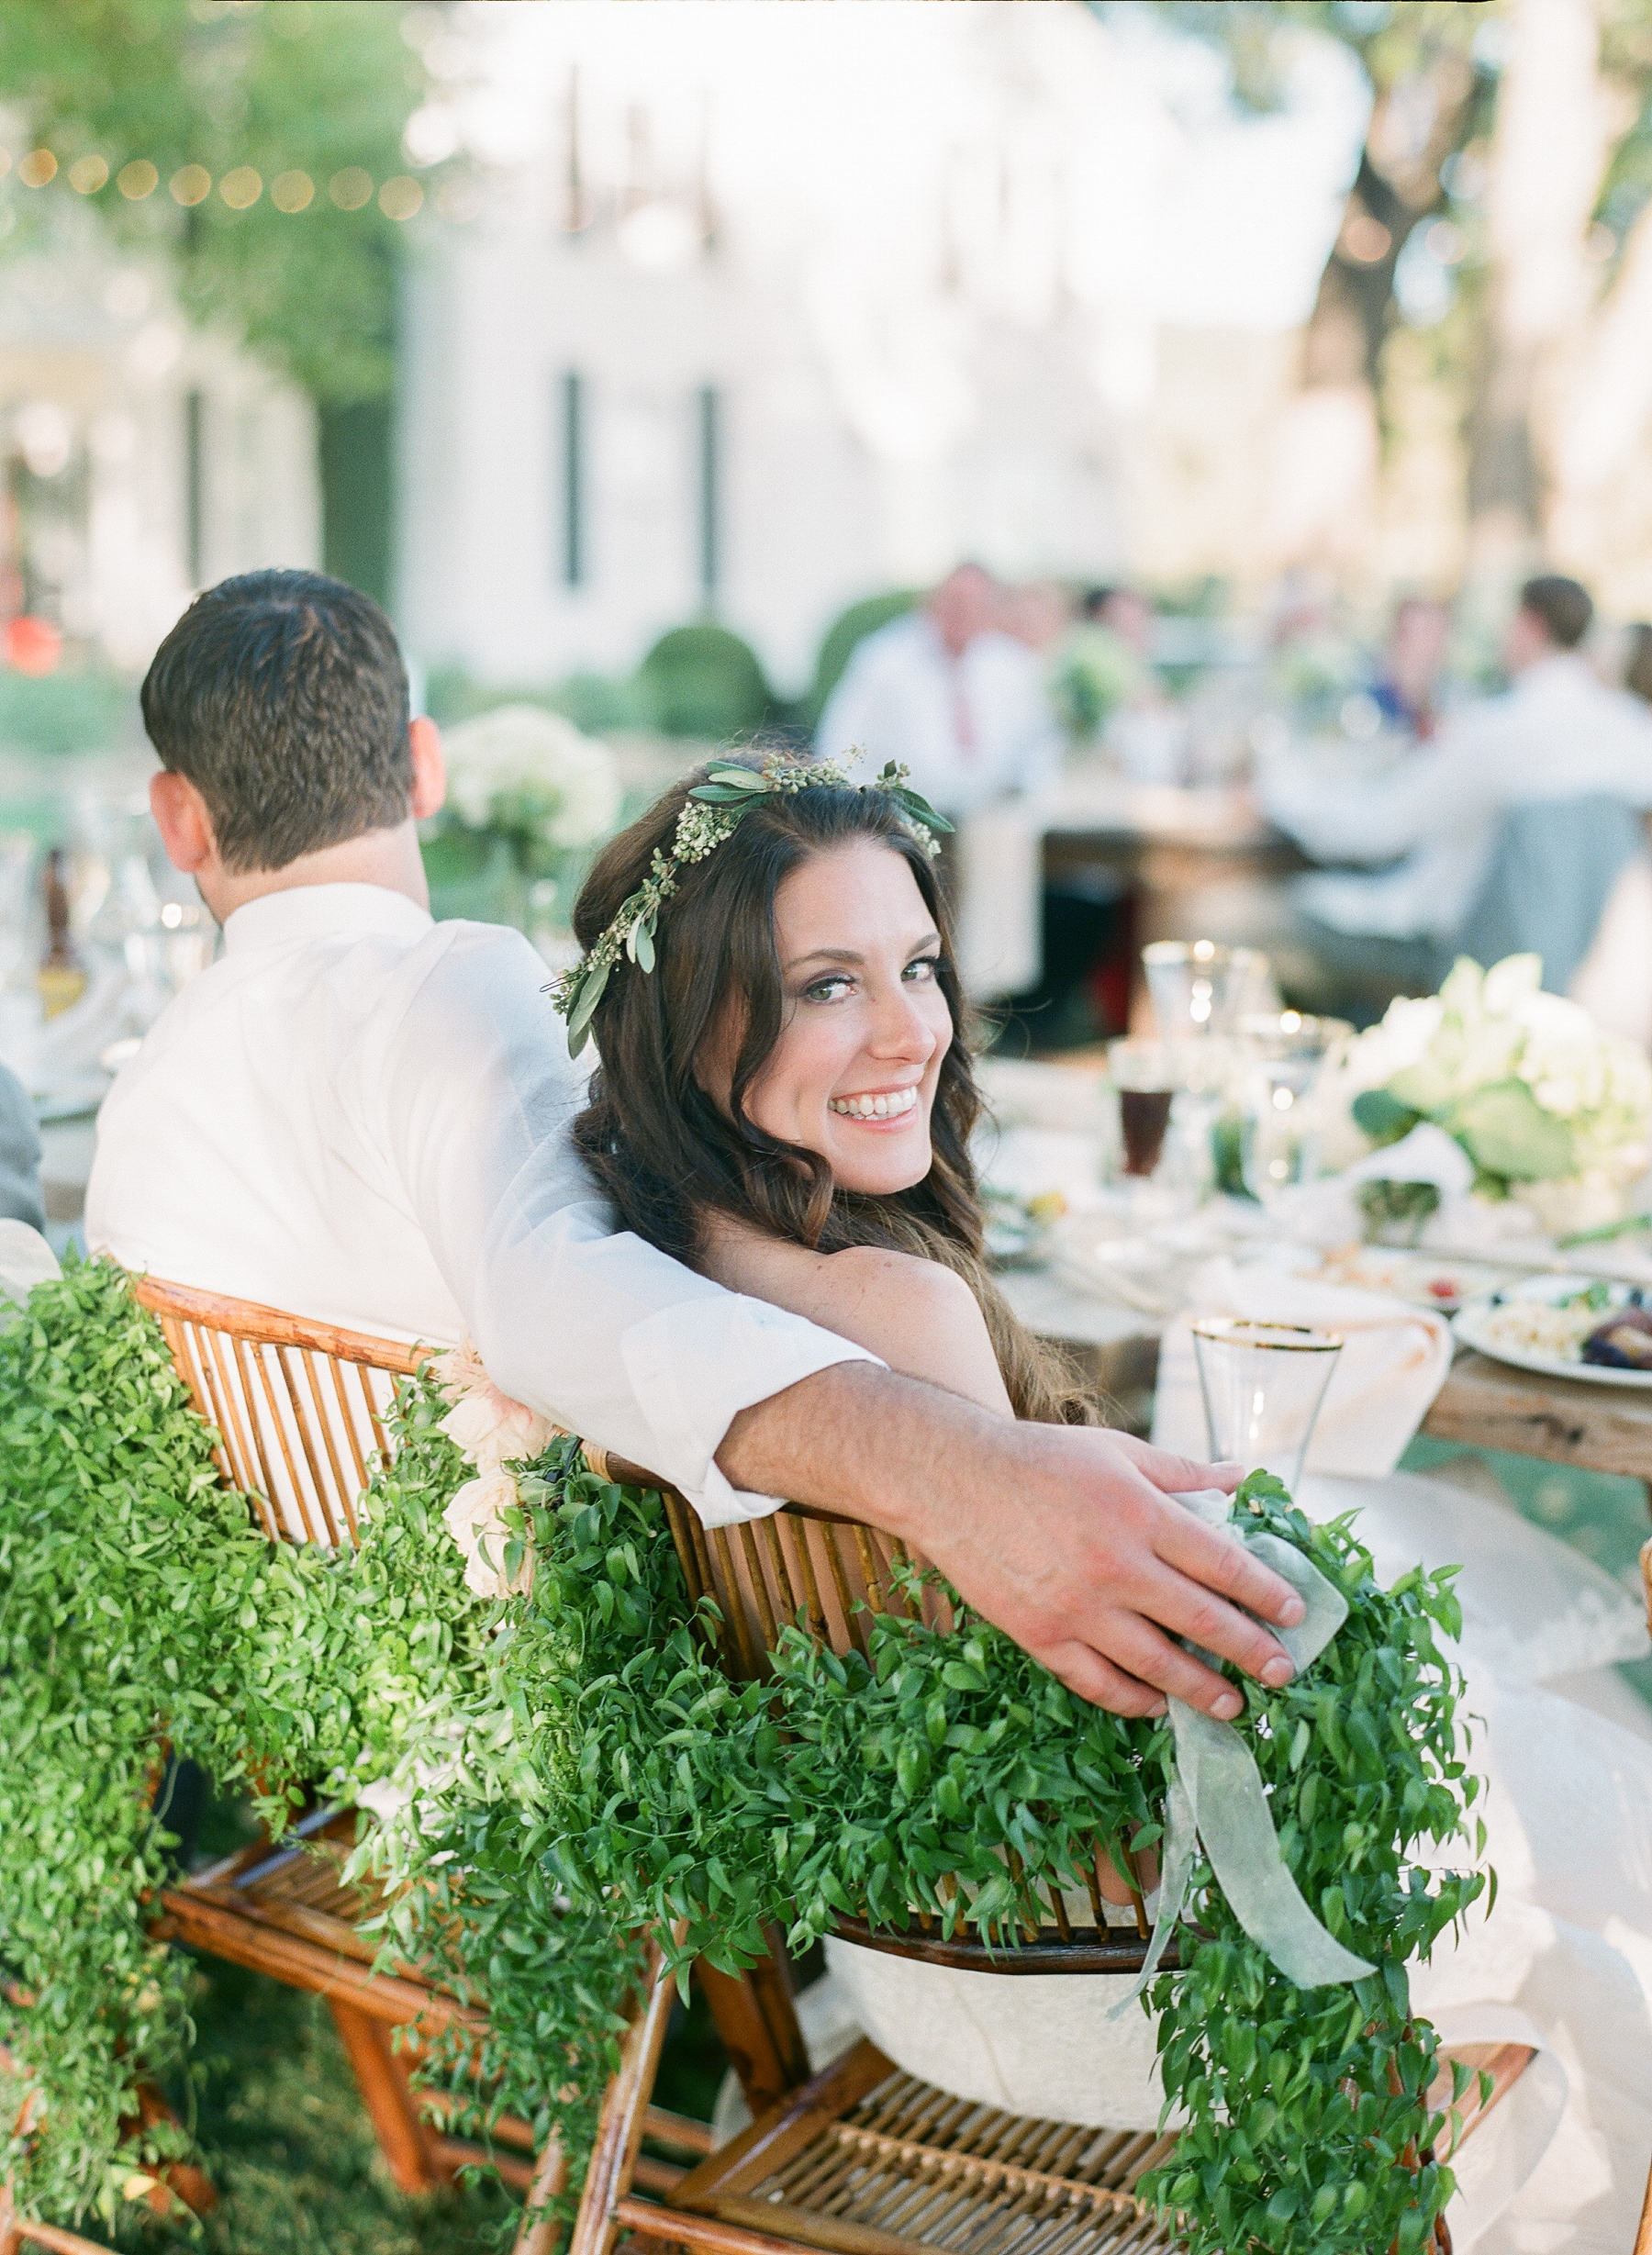 Fine Art Wedding Photographer | HammerSky Vineyards Wedding | Bride and Groom at Reception | Bride with Flower Crown | Greenery Adorned Wedding Chairs | Outdoor Wedding Reception | California Wedding | Vineyard Wedding | Wine Country Wedding | Molly Carr Photography